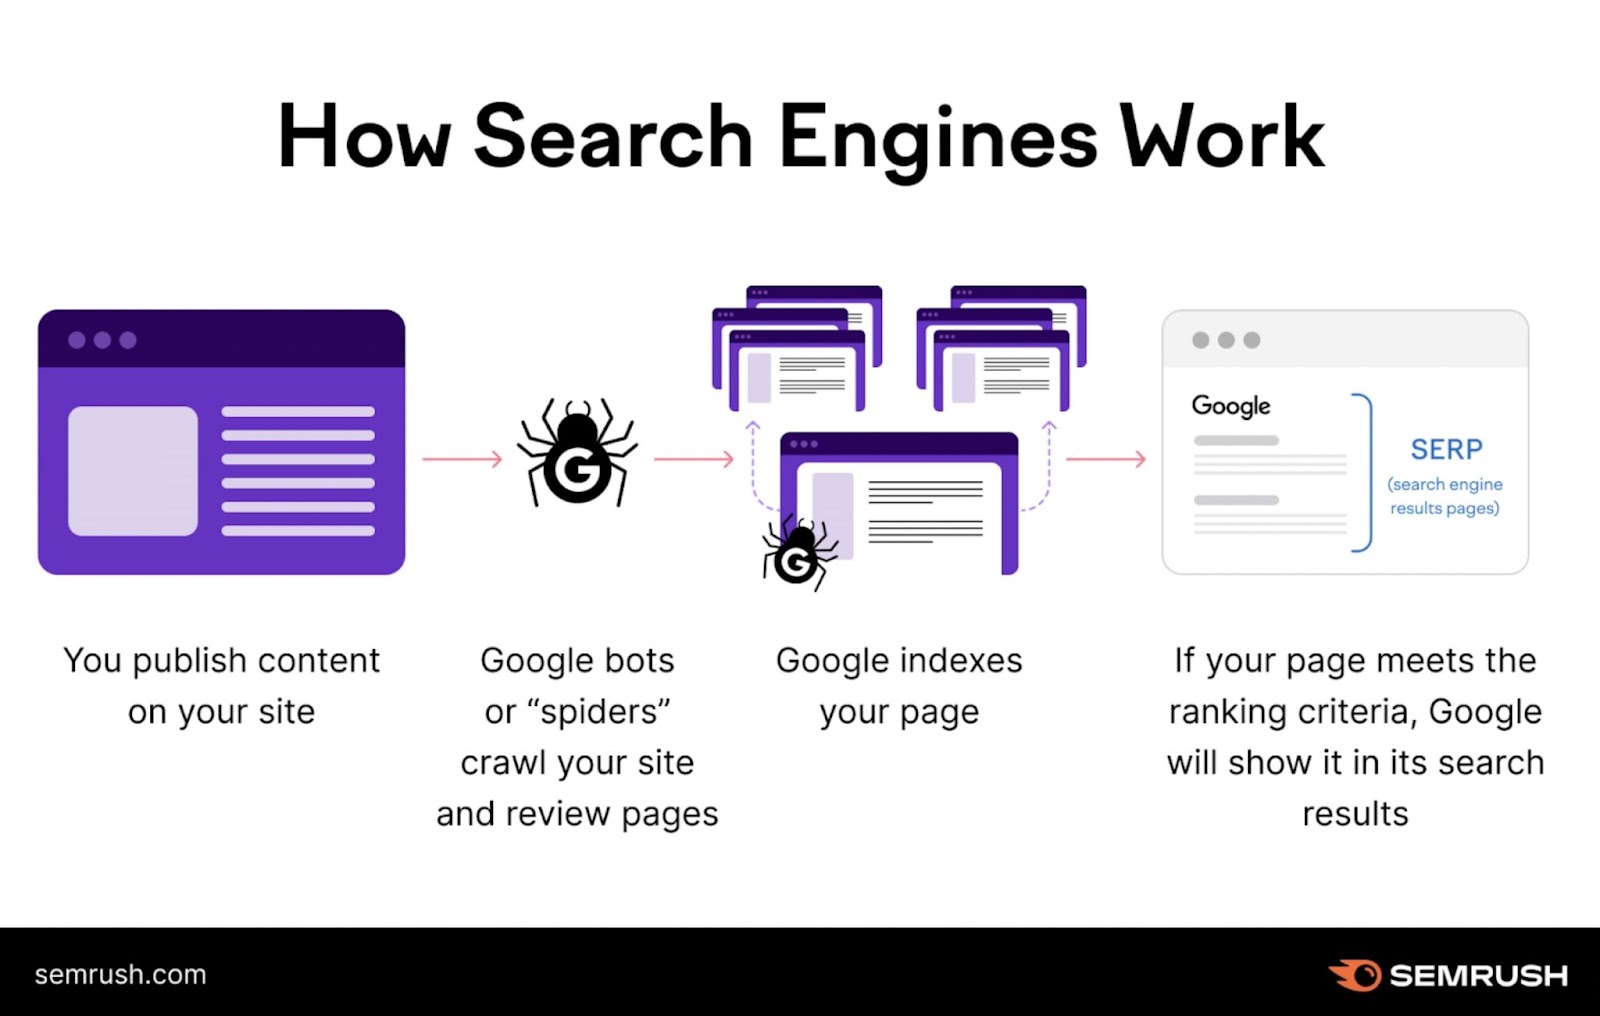 How search engines work illustrated